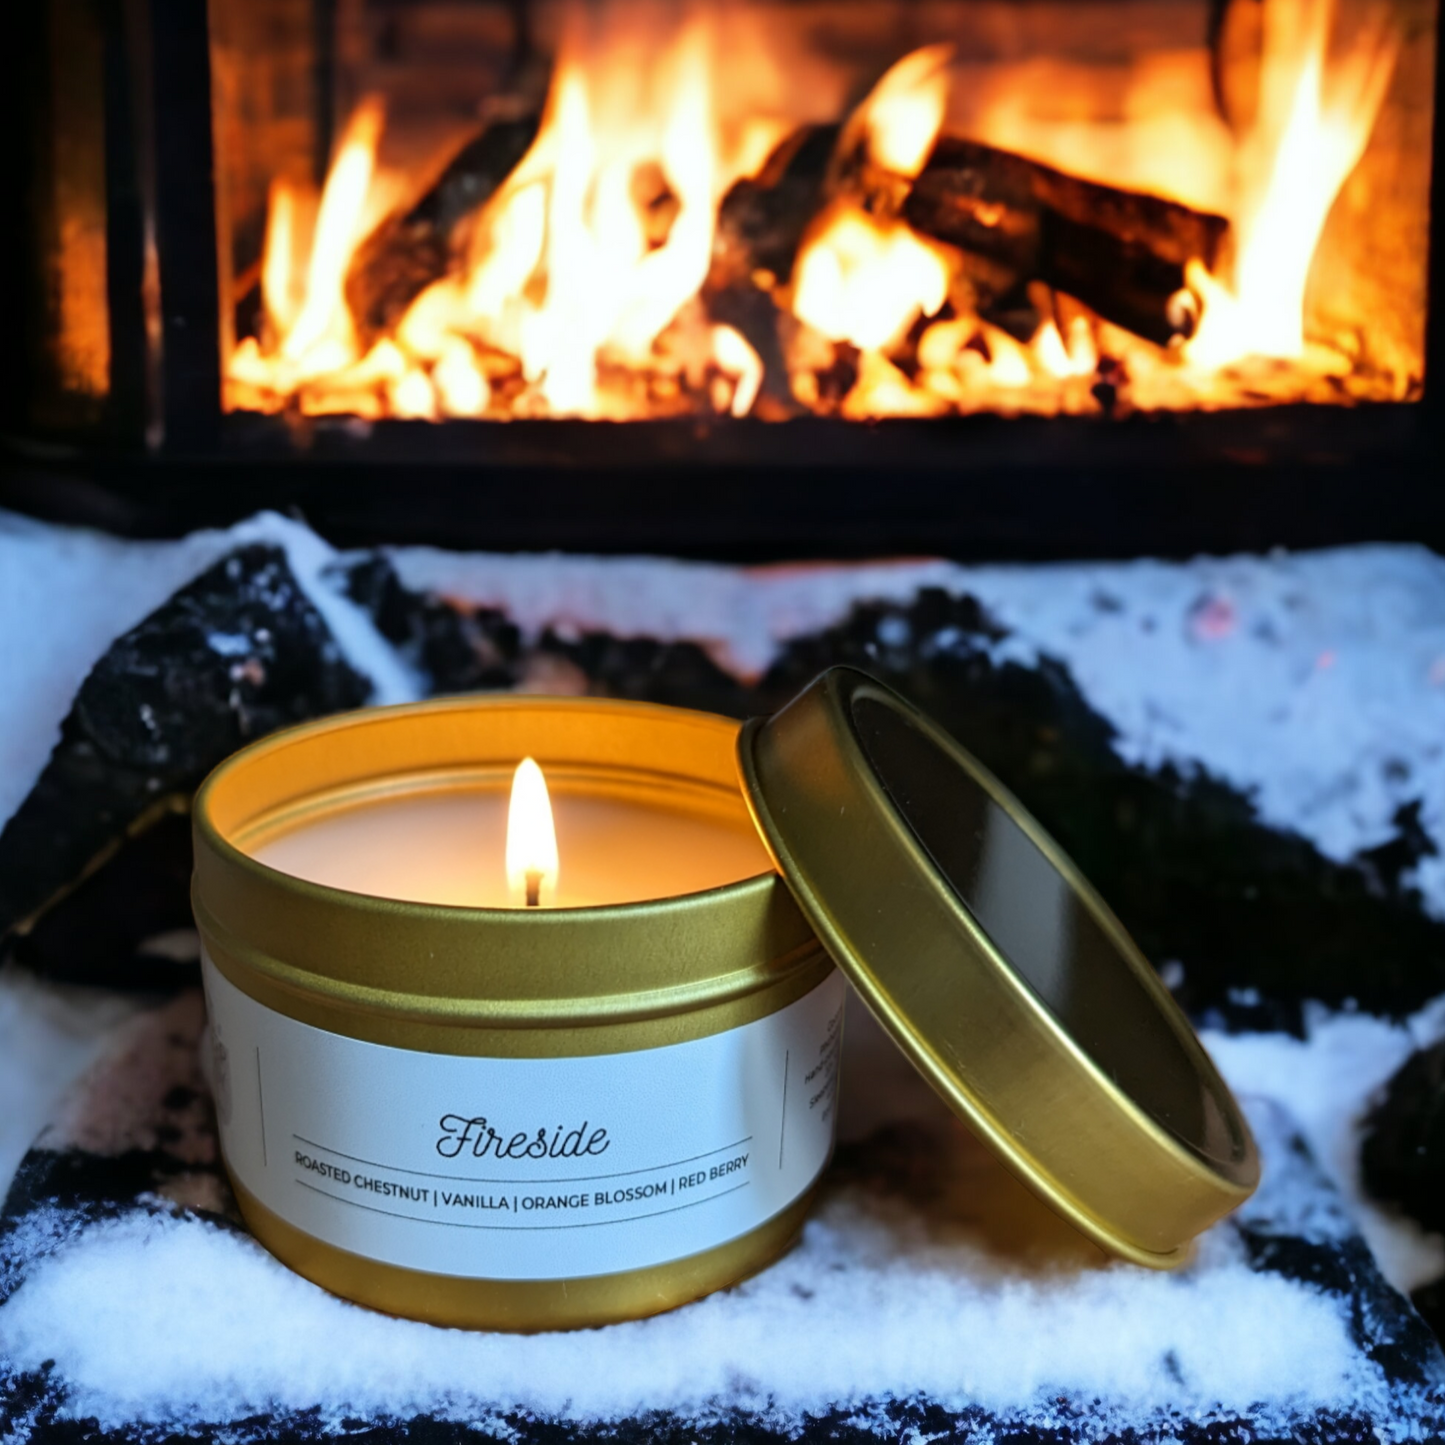 4oz gold travel tin candle is displayed in front of a roaring fireplace. Our Fireside coconut soy candle is inspired by Replica Maison Margiela By The Fire Perfume. 